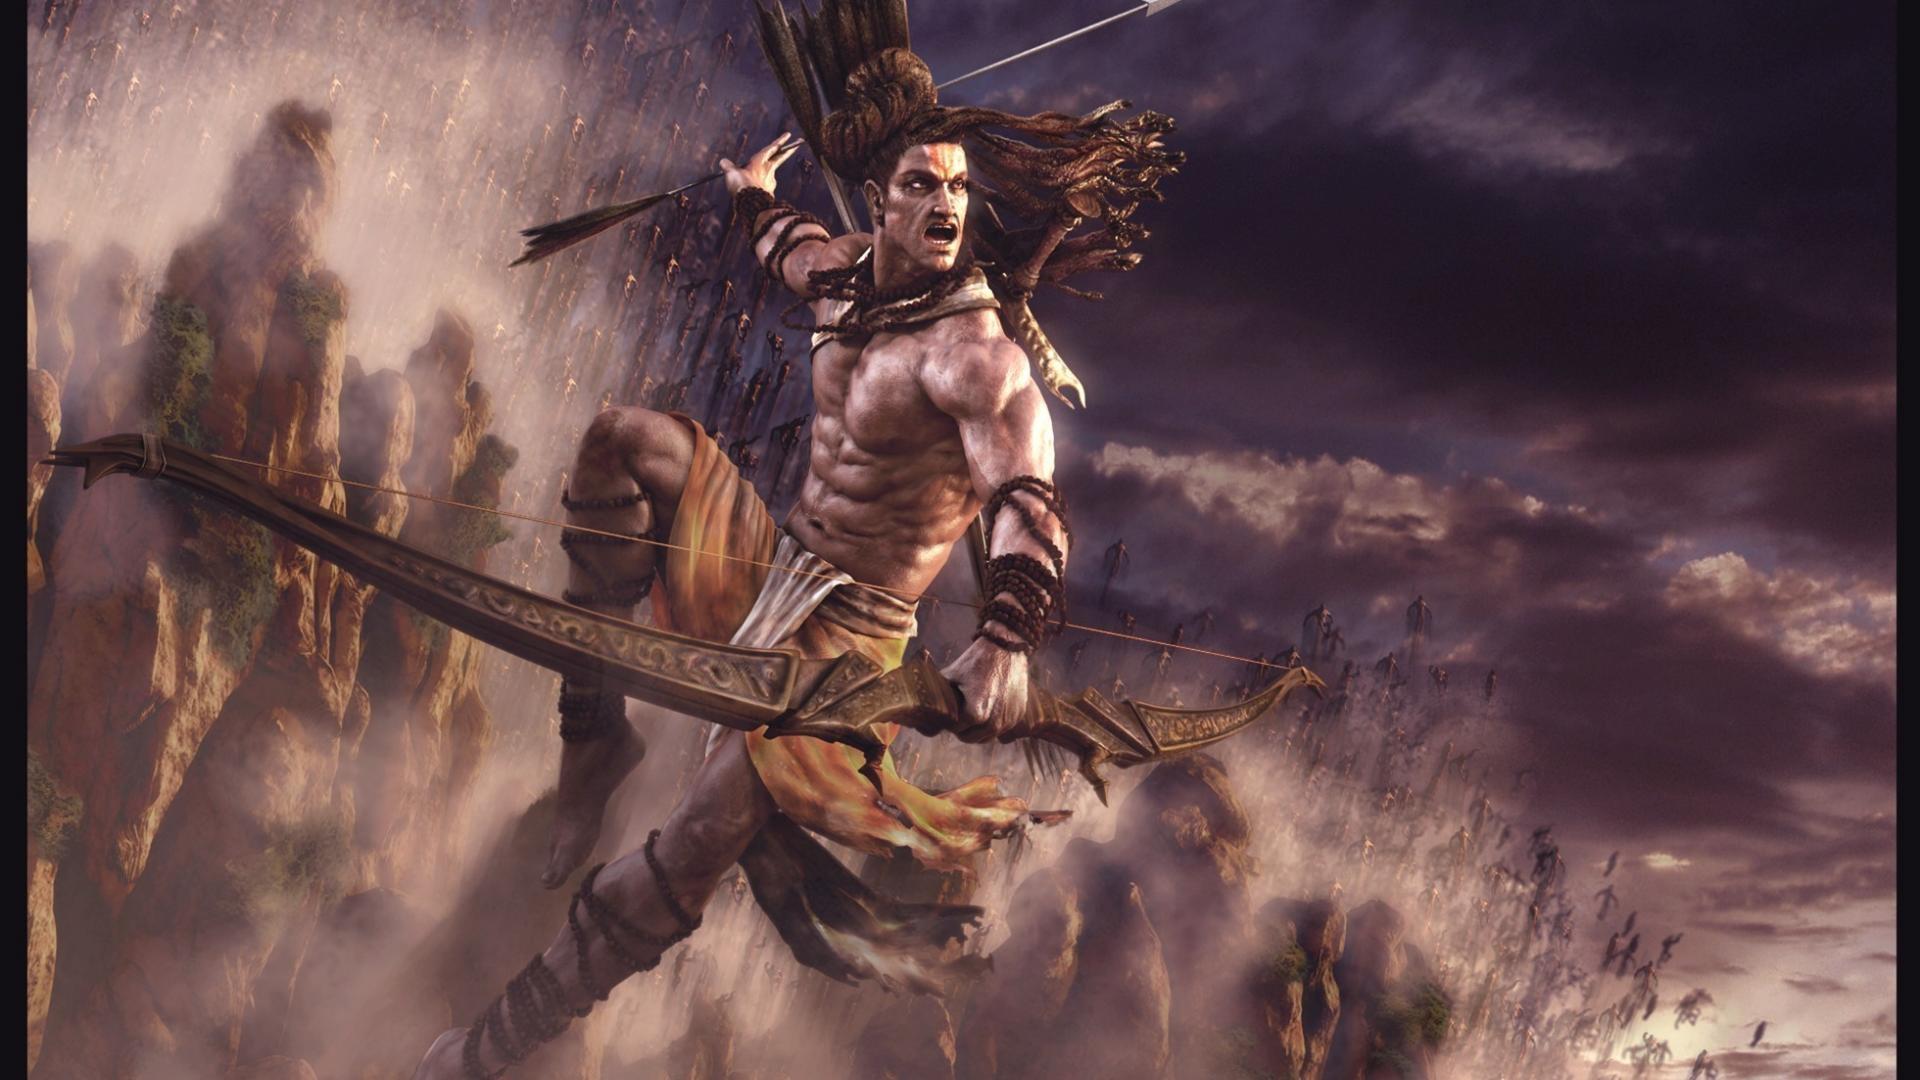 Lord Shiva Angry Hd Wallpapers 1080p.